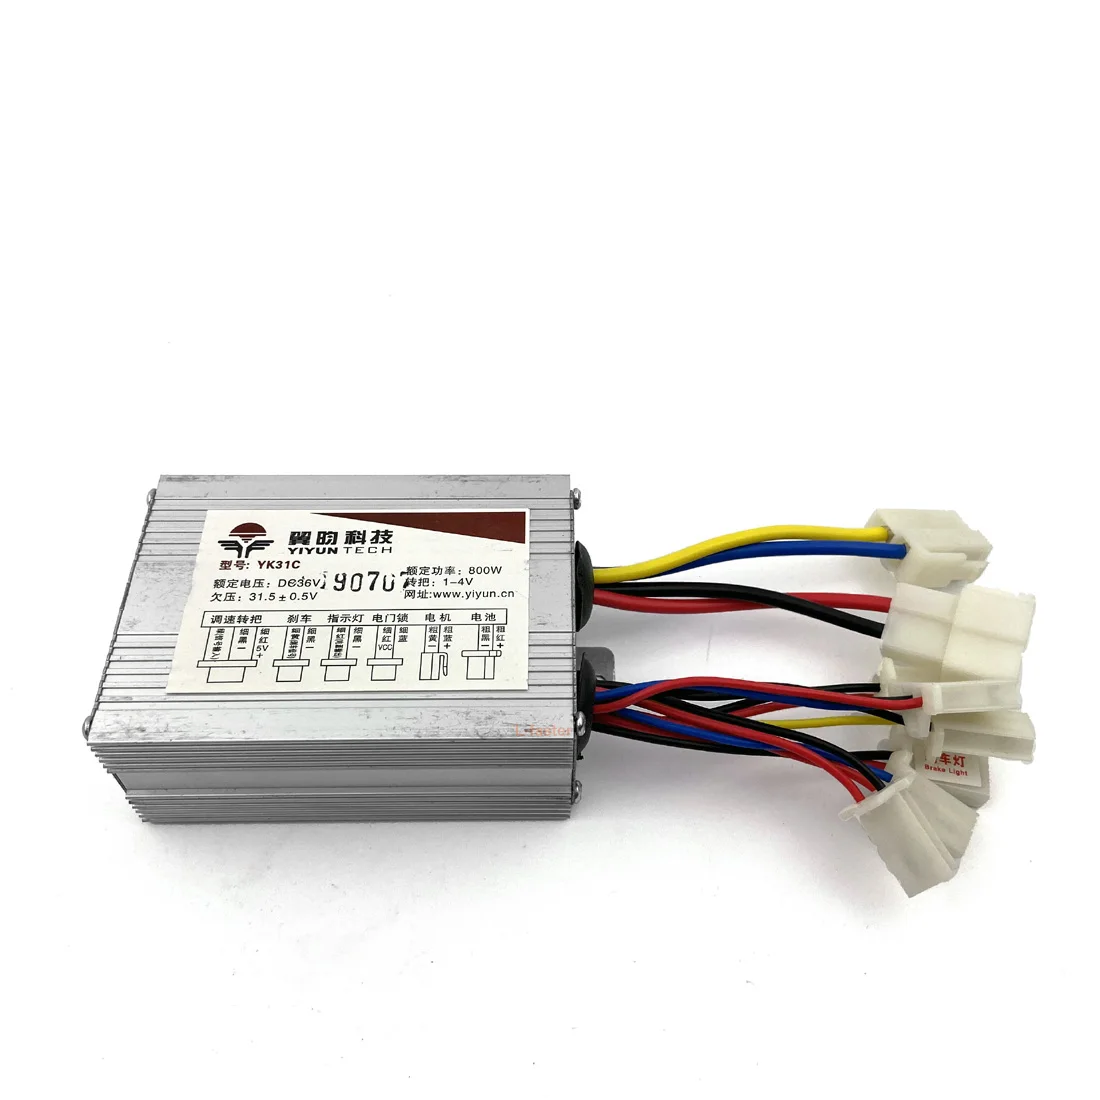 

800W 48V 36V brush dc motor controller electric bicycle scooter brushed for ebike with high quality